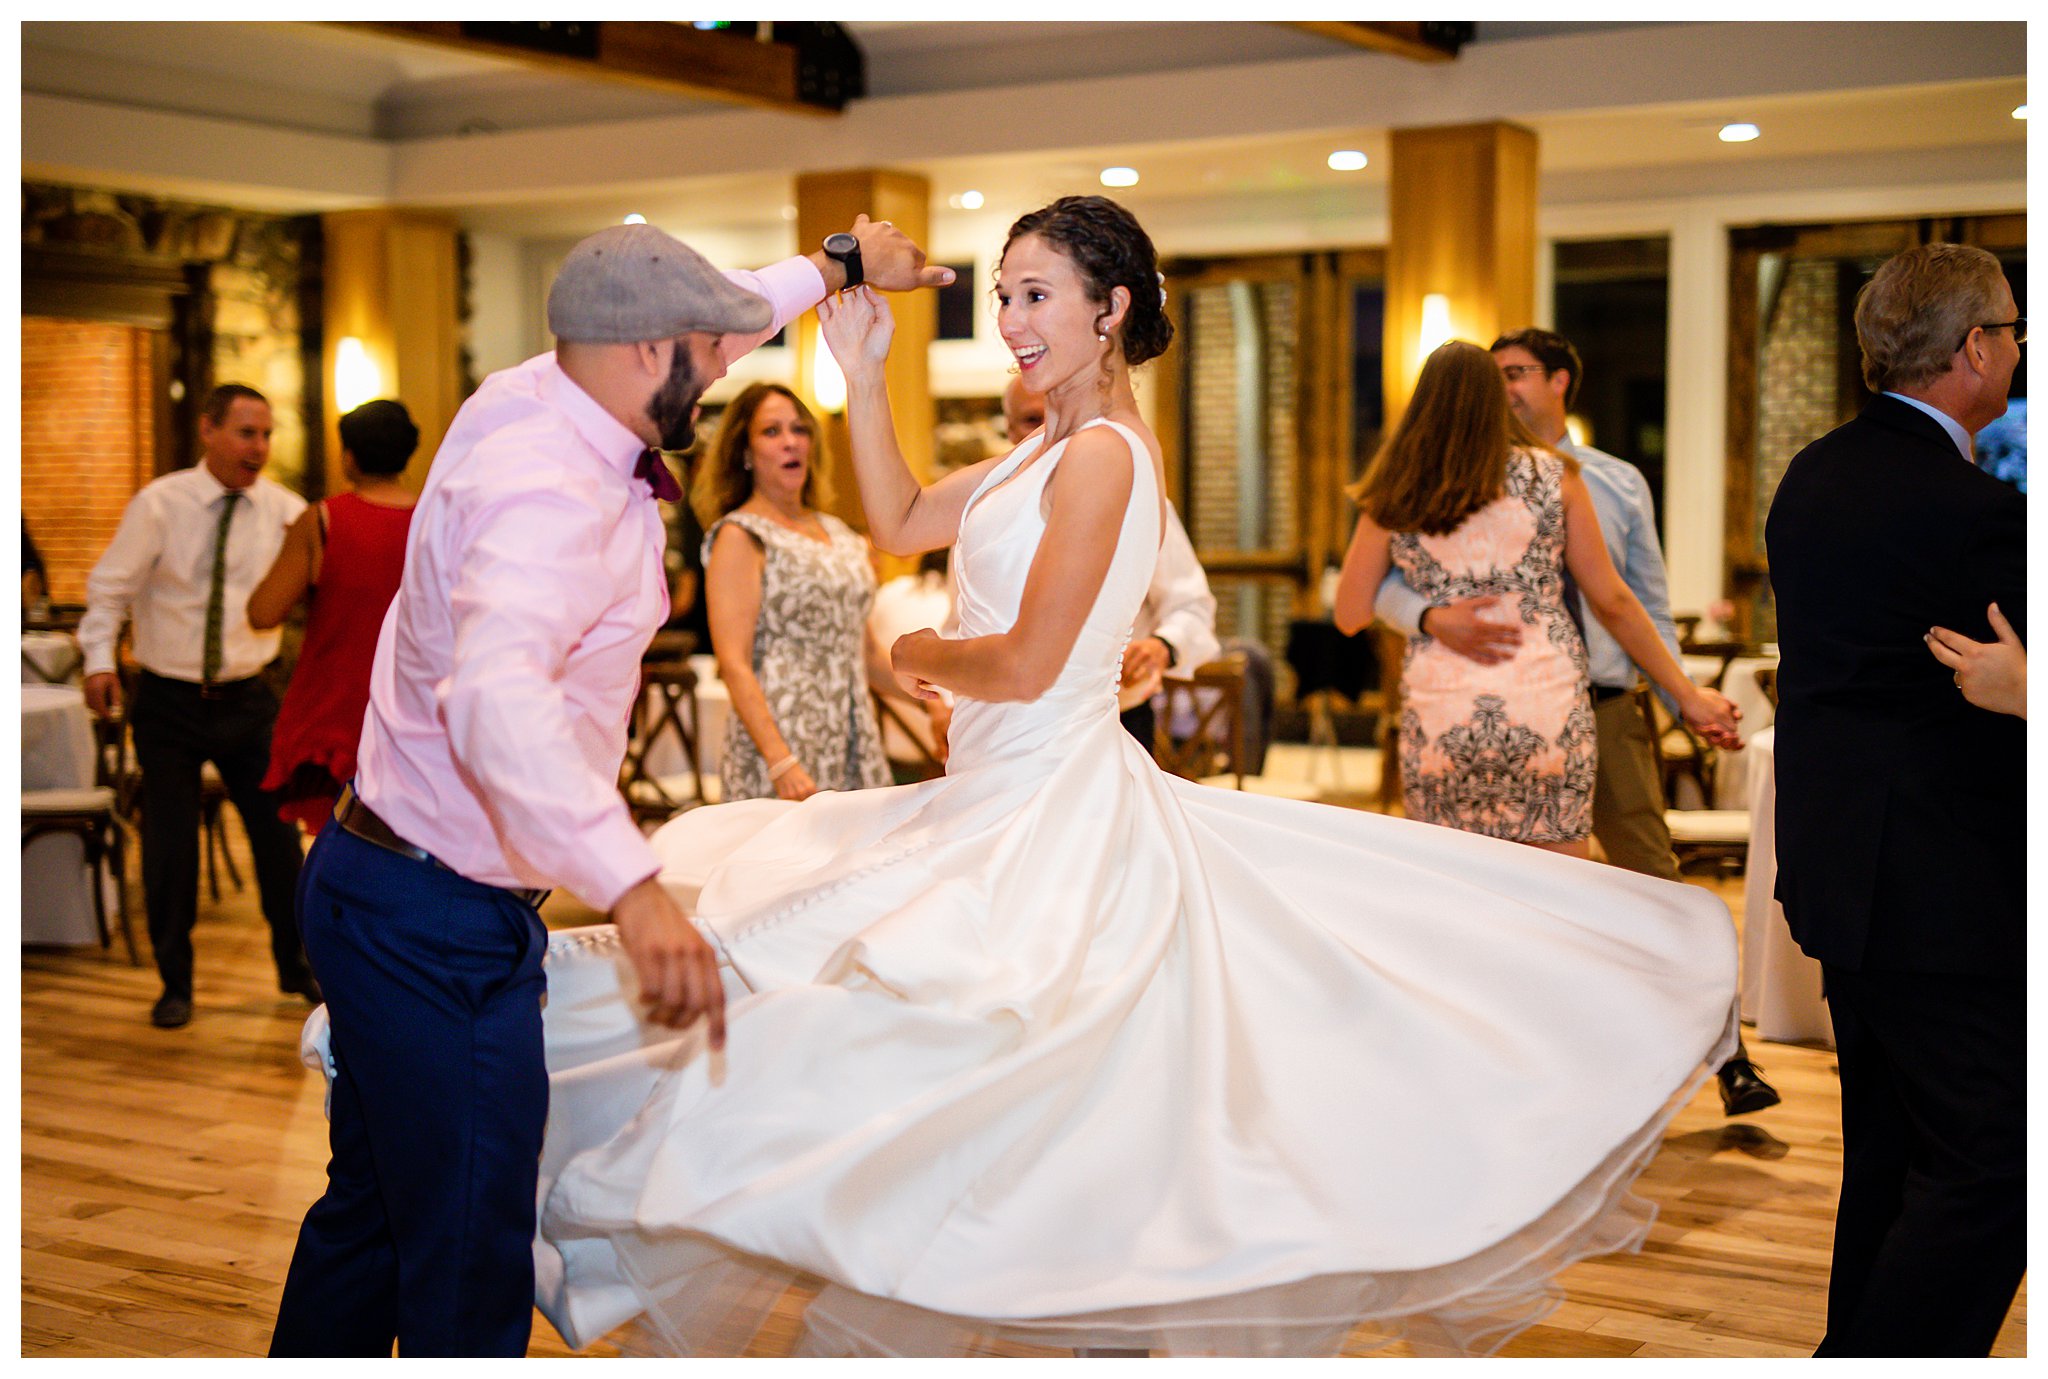 A couple has their first dance in front of their guests